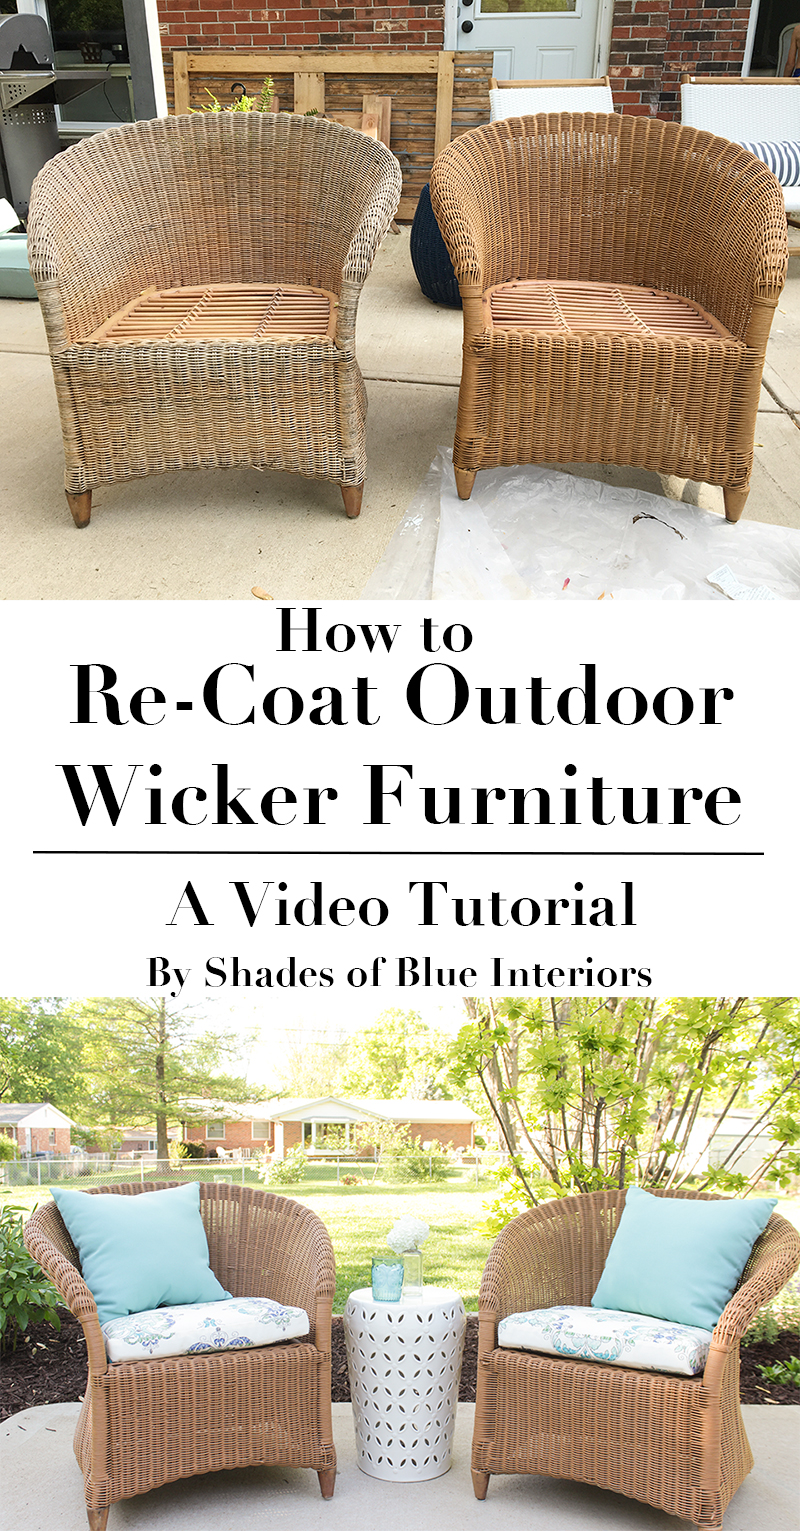 How To Re Coat Wicker Furniture, What Spray Paint For Wicker Furniture